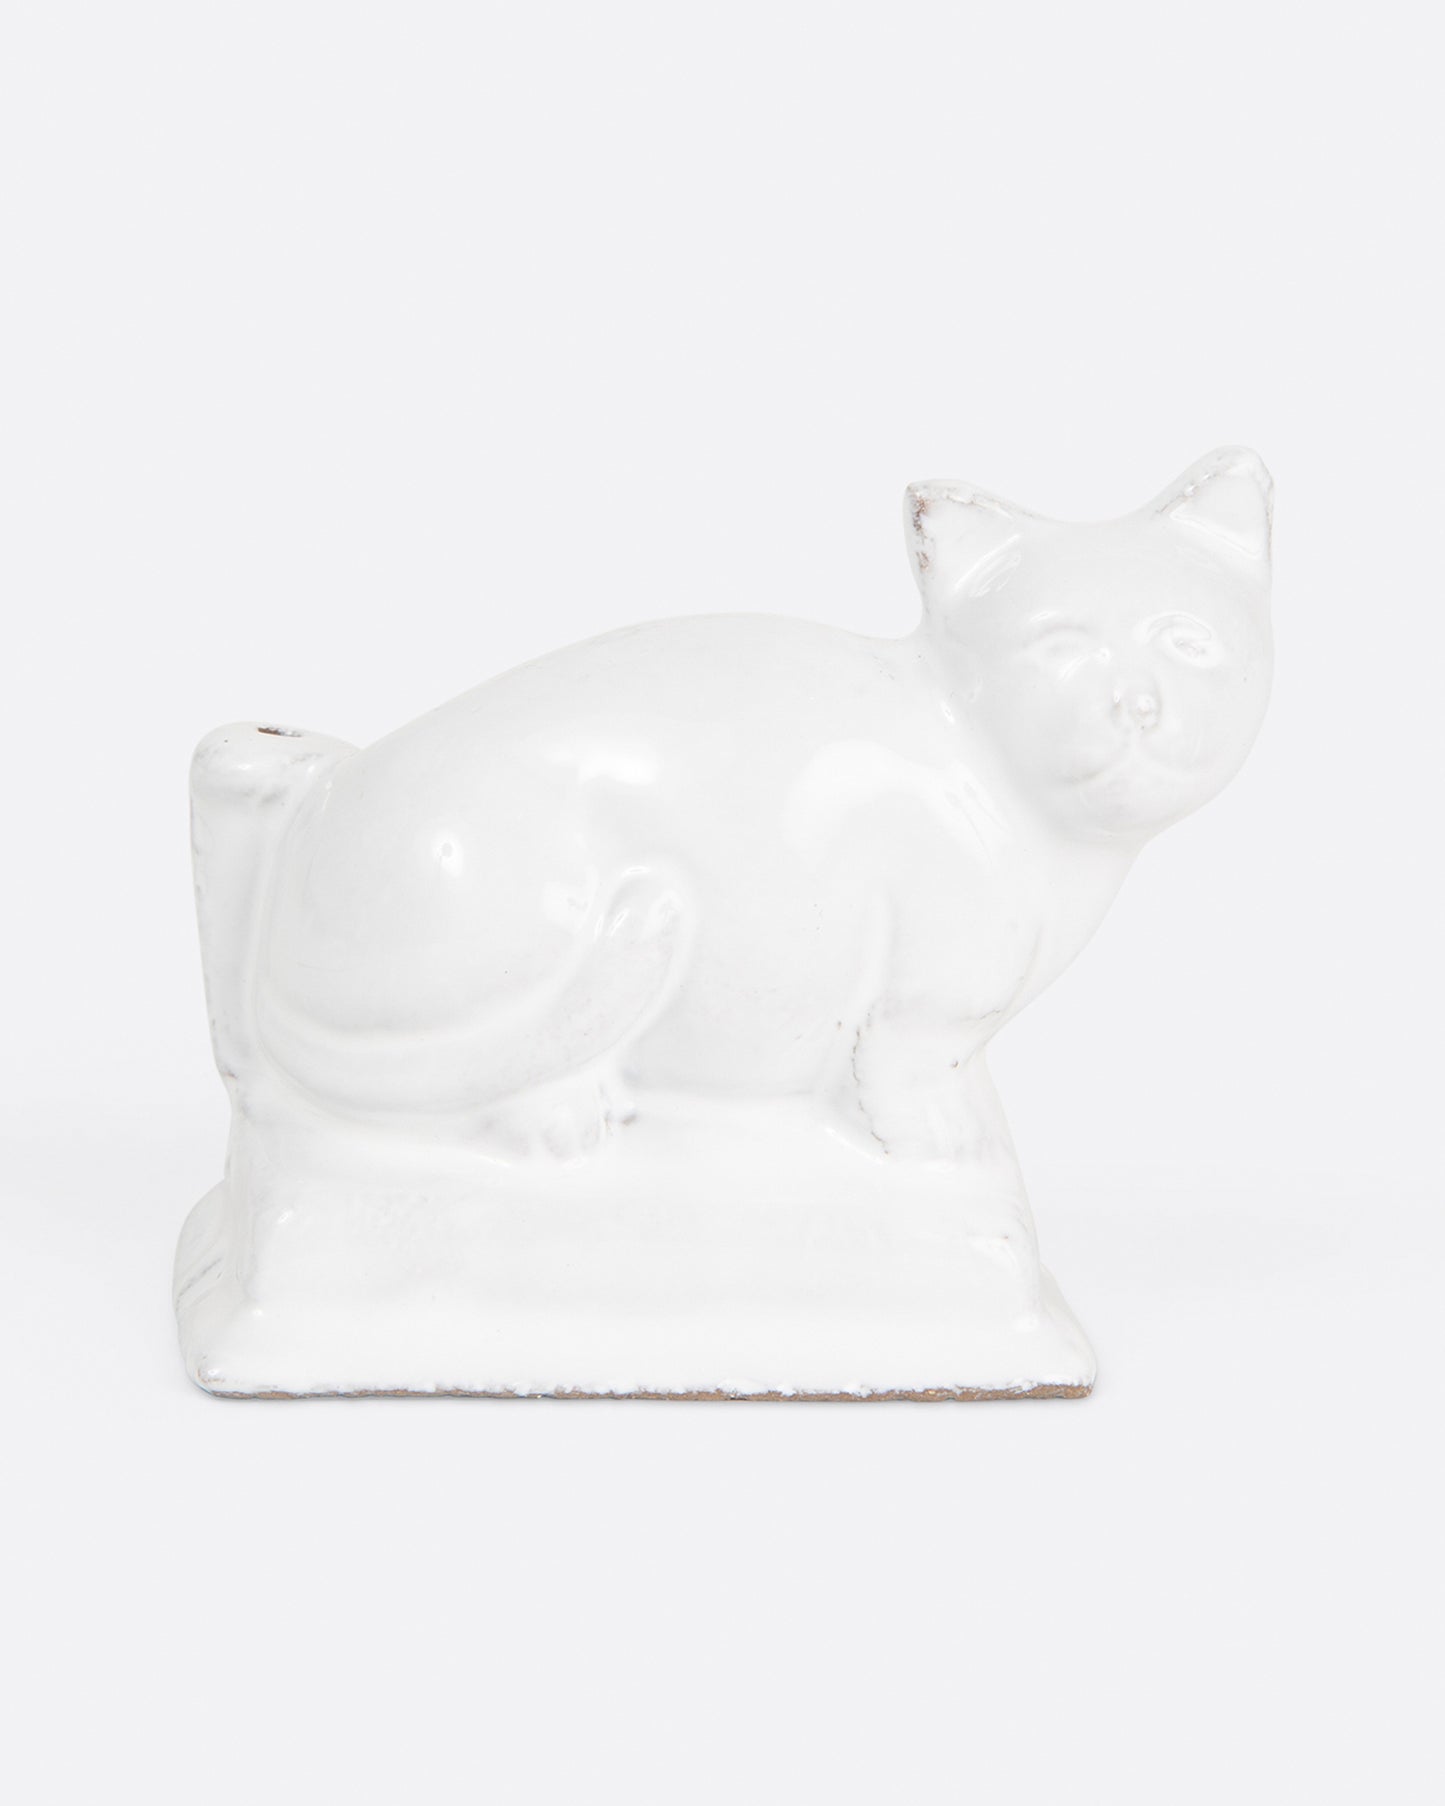 A glazed white ceramic cat-shaped incense holder, shown from the front.